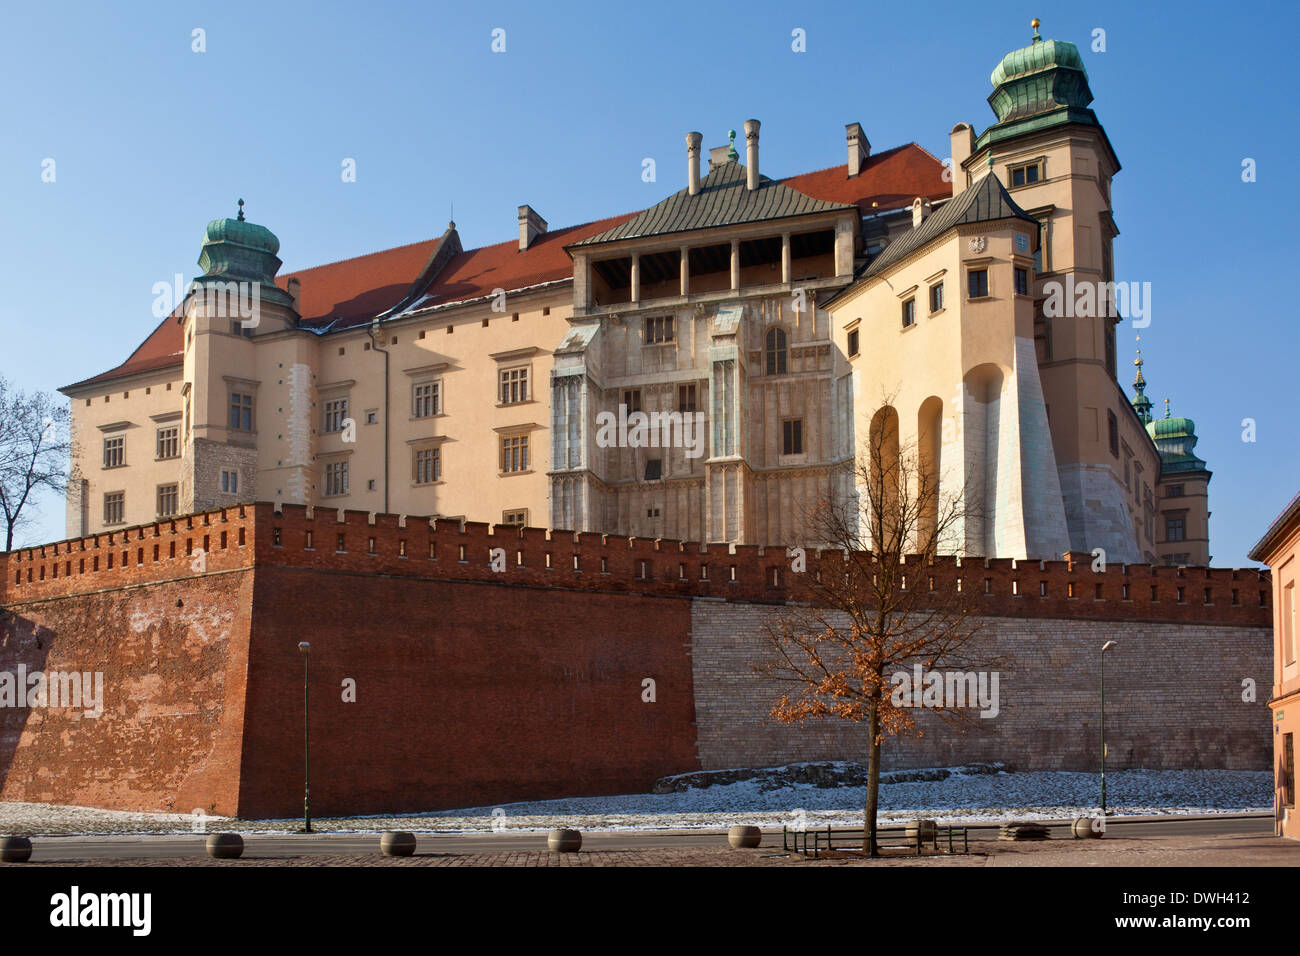 The Royal Castle on Wawel Hill in the city of Krakow in Poland. Stock Photo